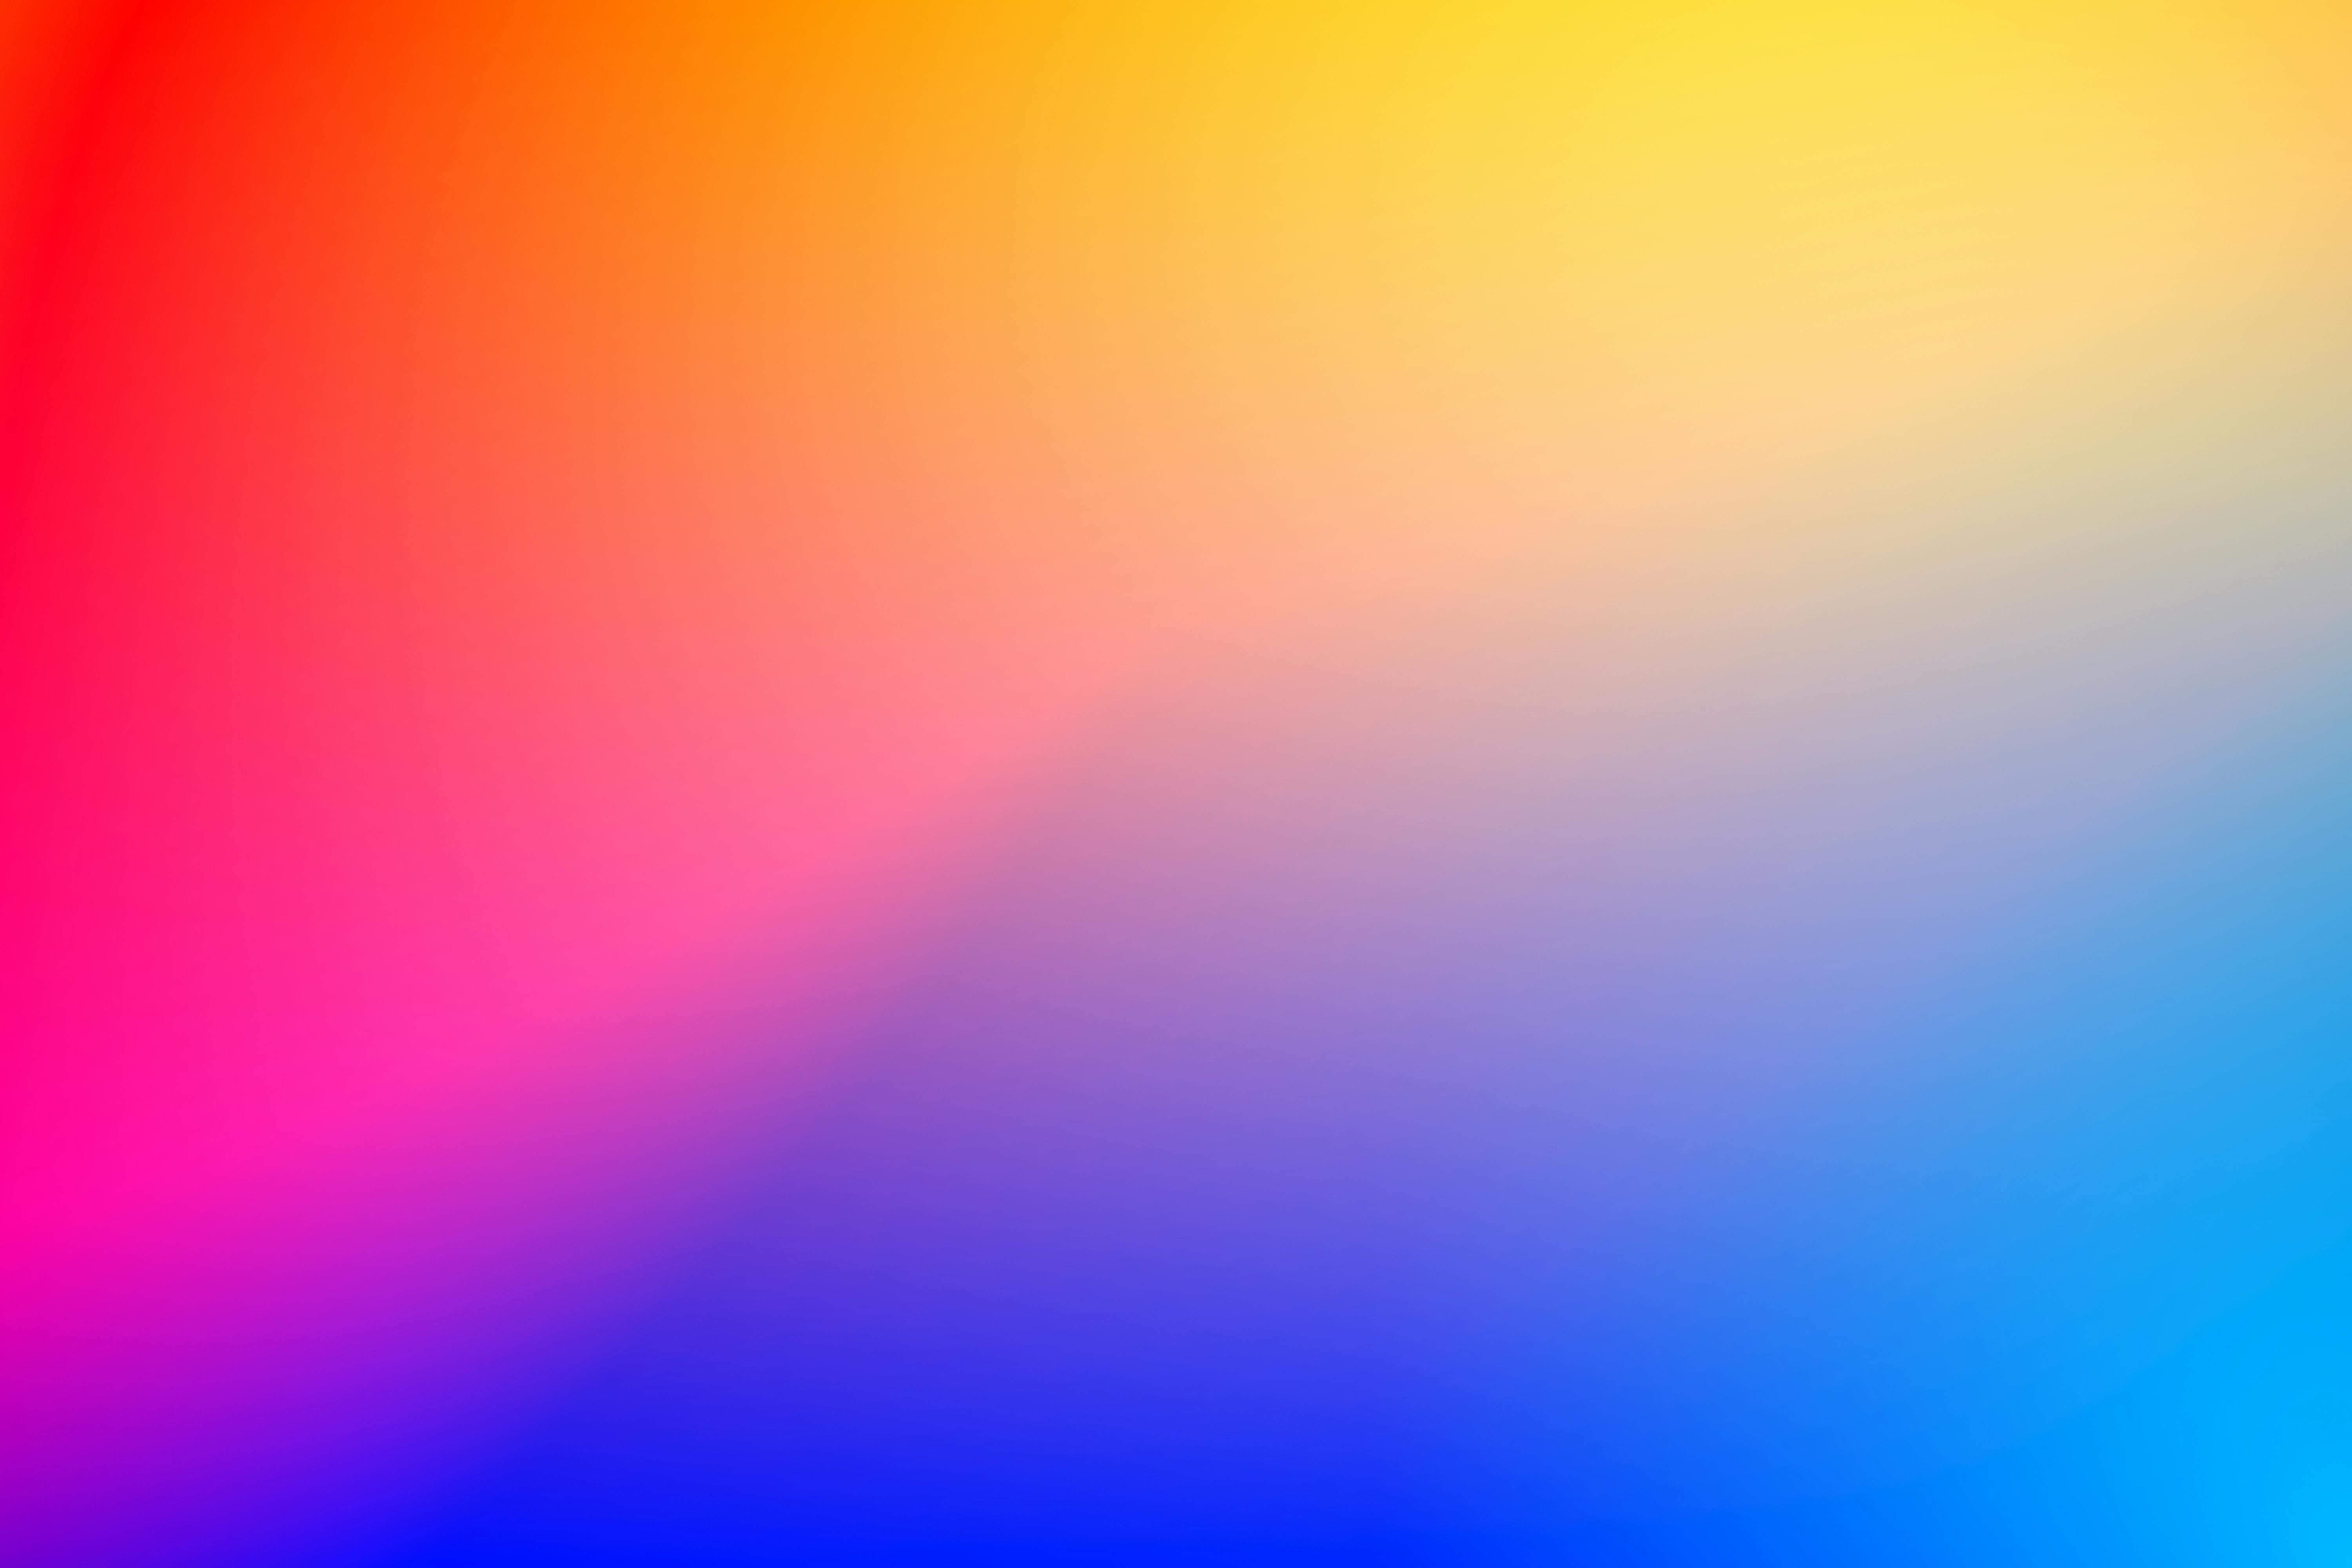 Gradient Photos, Download The BEST Free Gradient Stock Photos & HD Images